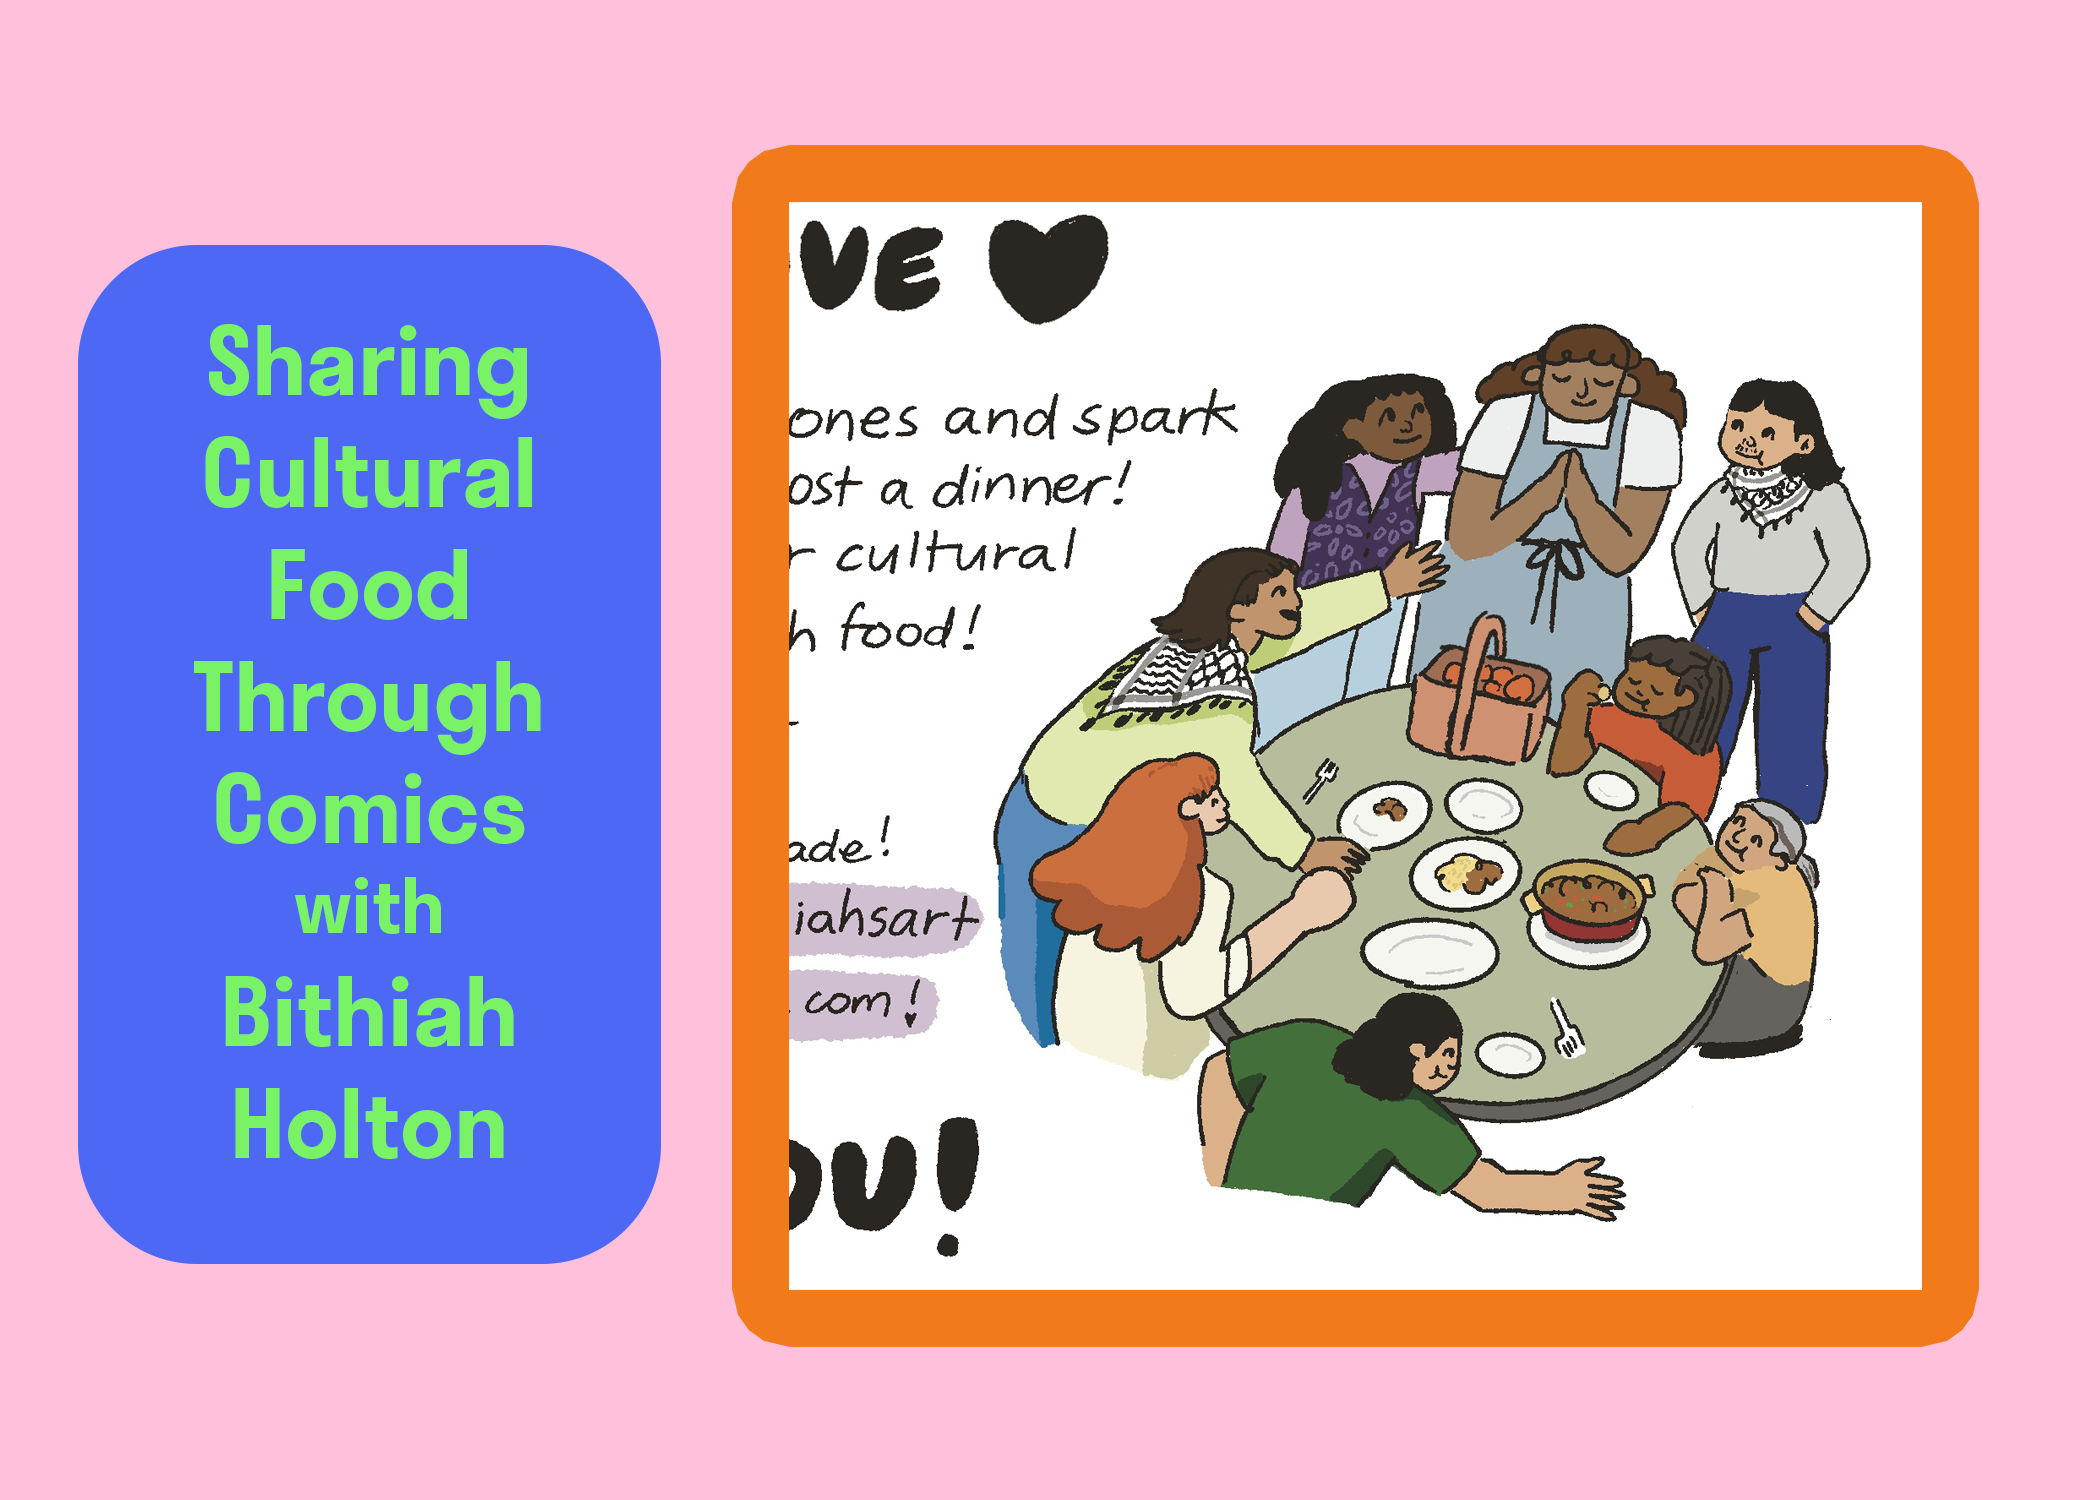 You are currently viewing Sharing Cultural Food Through Comics with Bithiah Holton